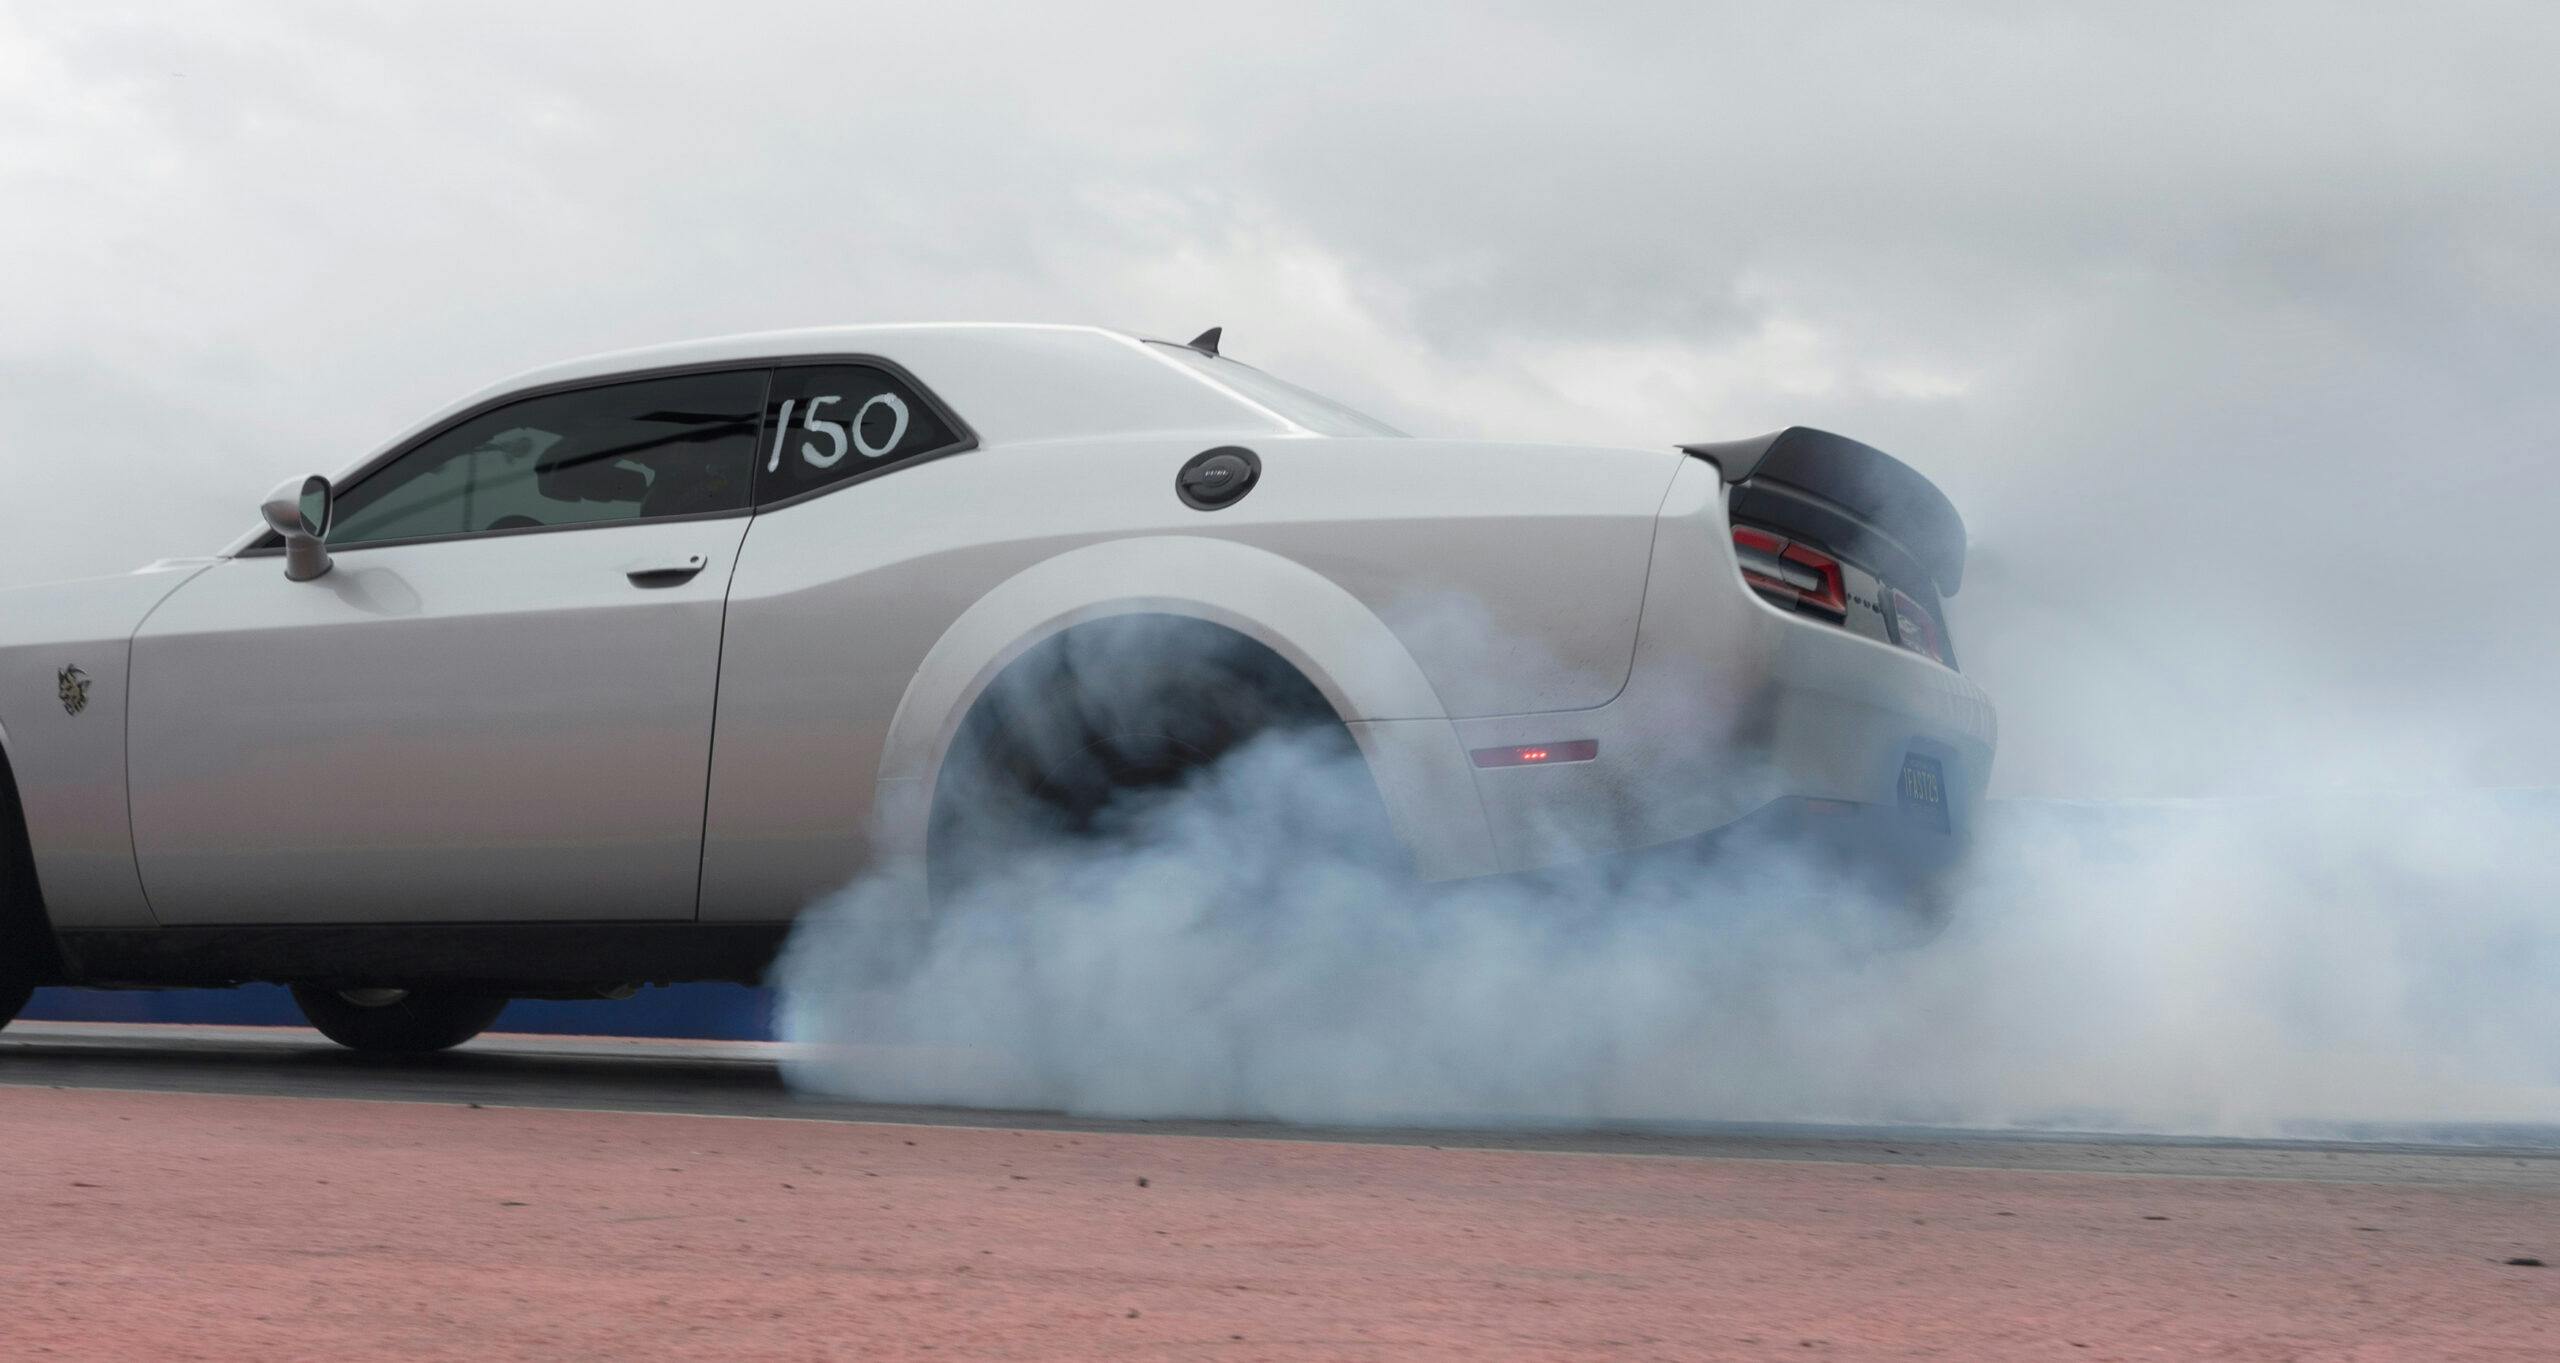 1025-hp Demon 170 is Challenger's tire-melting last call - Hagerty Media